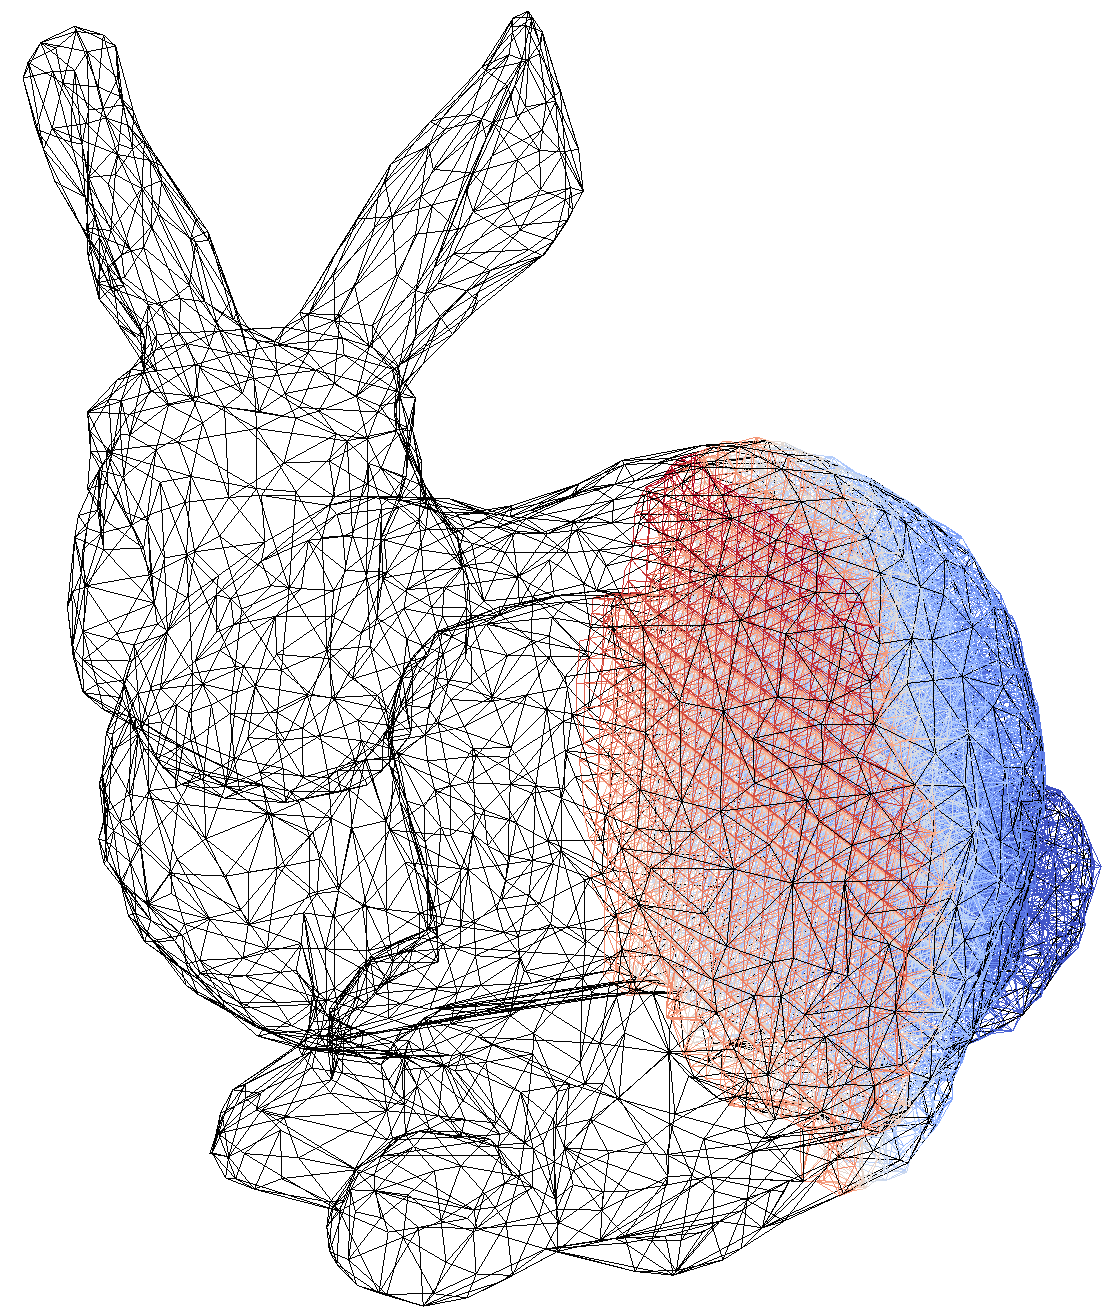 Enlarged view: Example of the Stanford bunny